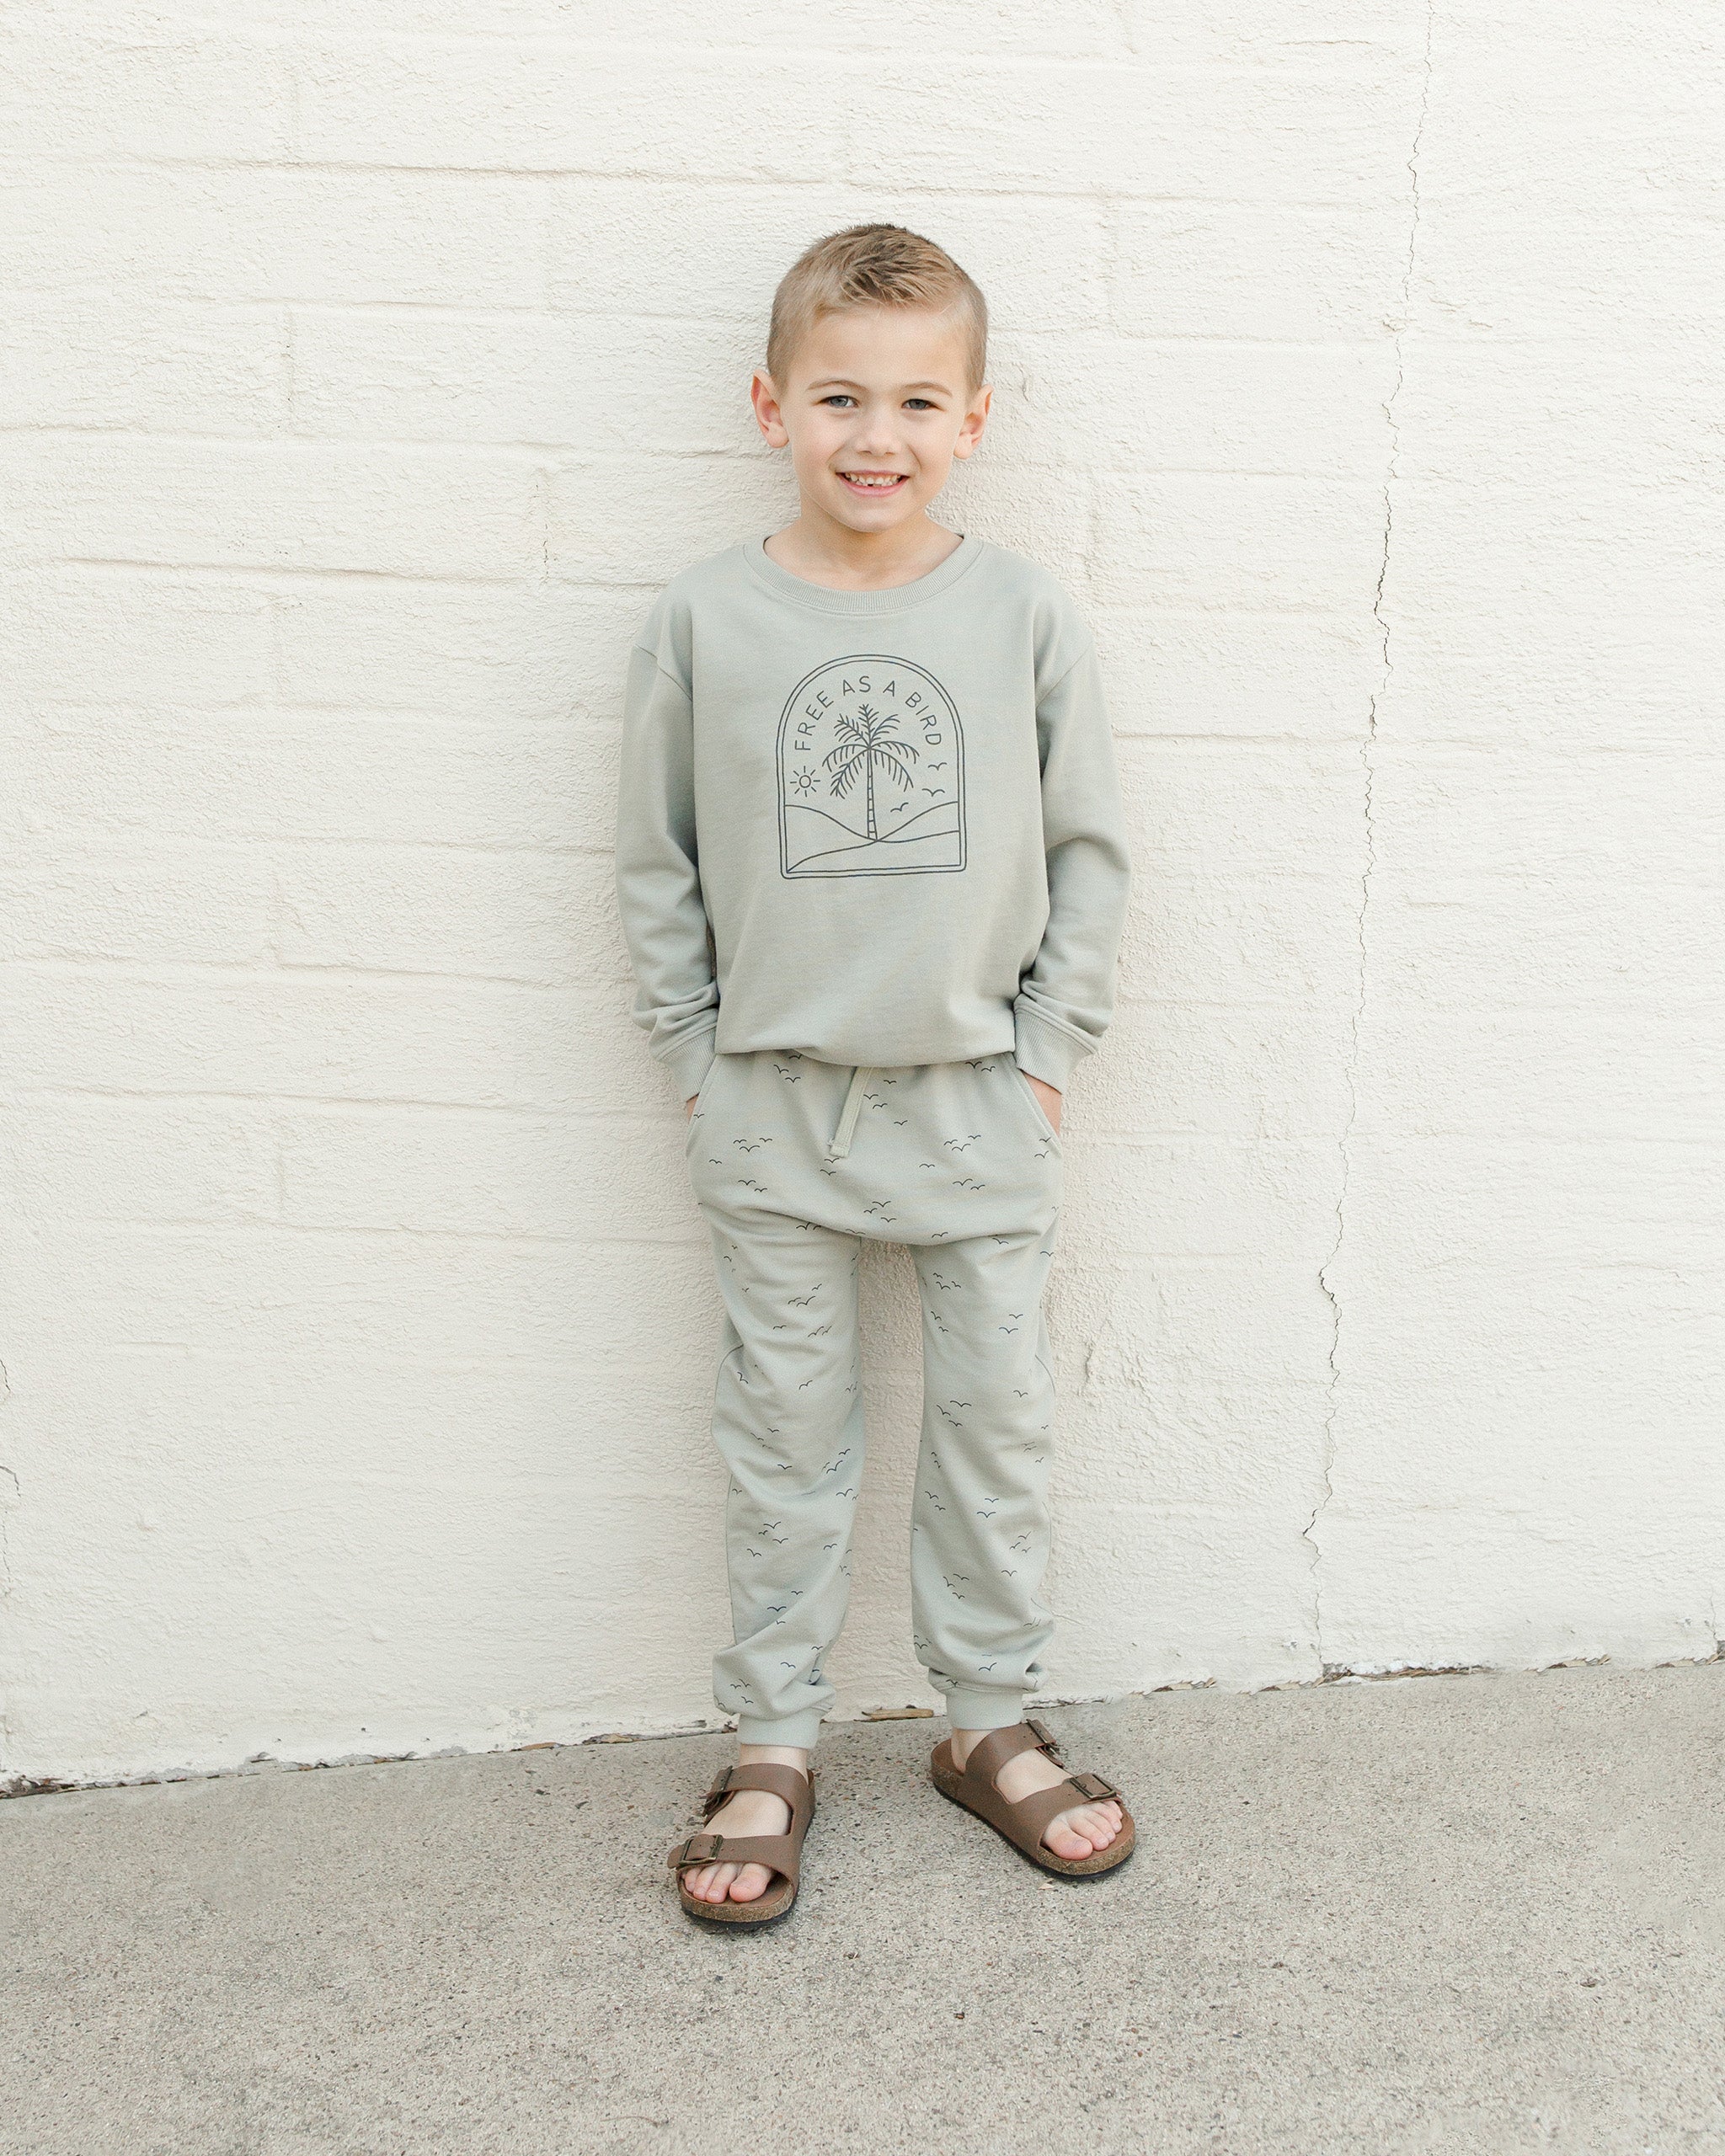 sweatshirt || free as a bird - Rylee + Cru | Kids Clothes | Trendy Baby Clothes | Modern Infant Outfits |